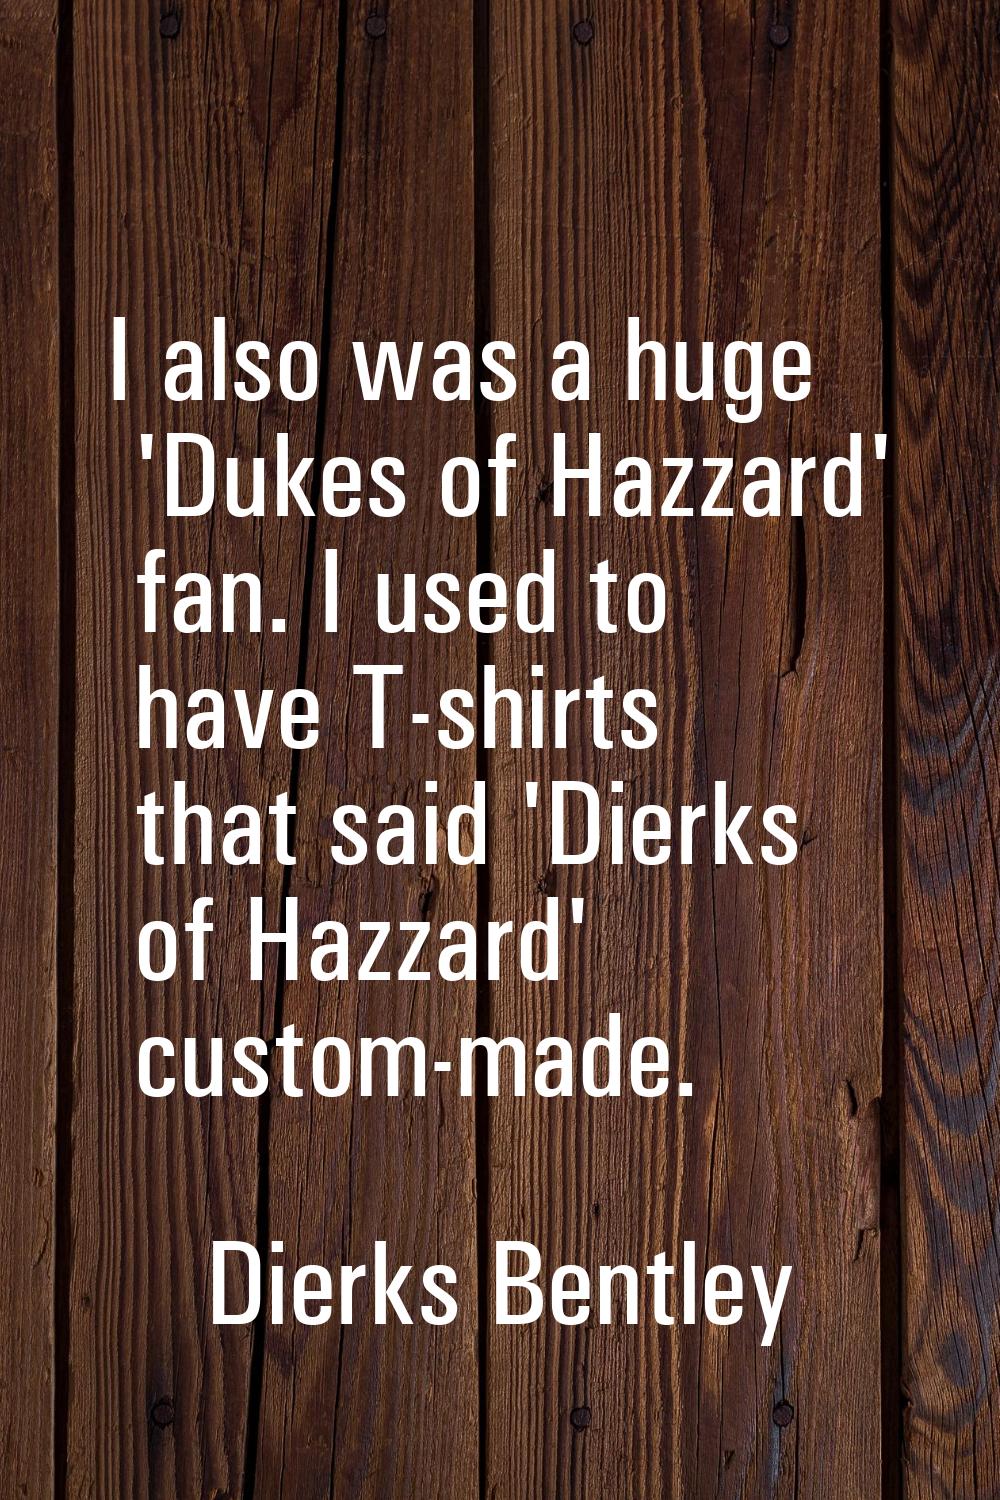 I also was a huge 'Dukes of Hazzard' fan. I used to have T-shirts that said 'Dierks of Hazzard' cus